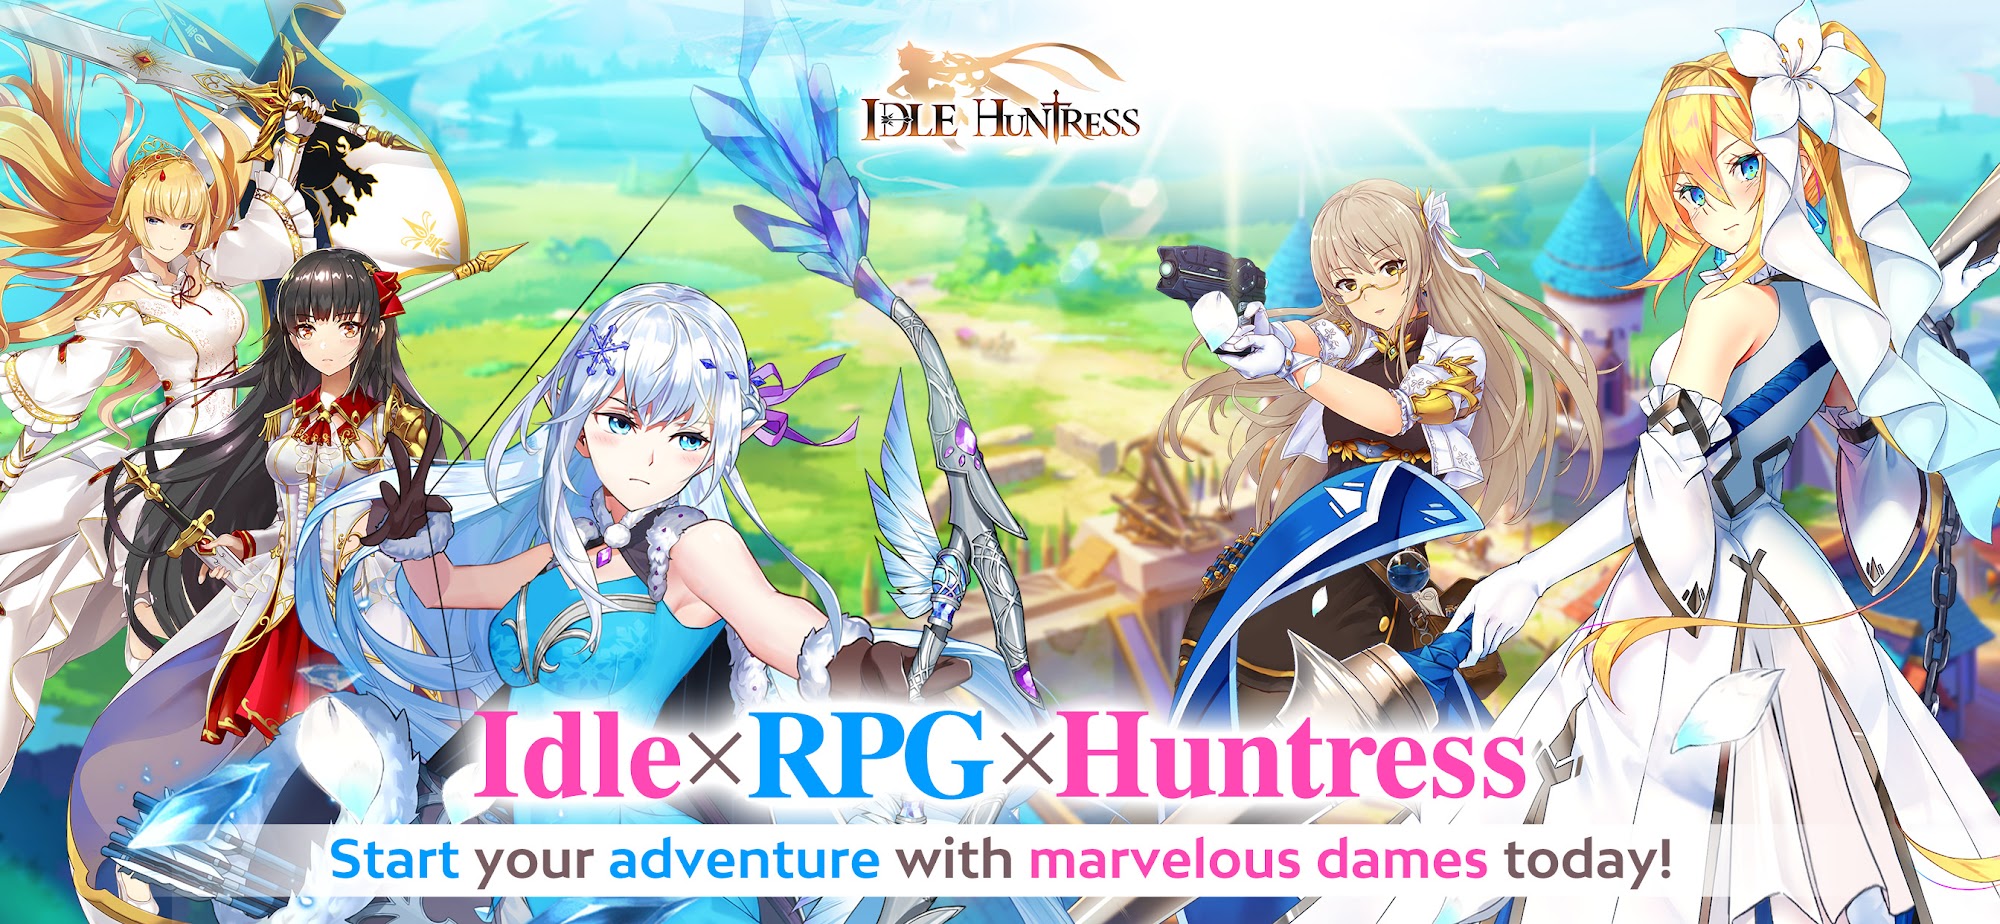 Idle Huntress: Dragon Realm for Android